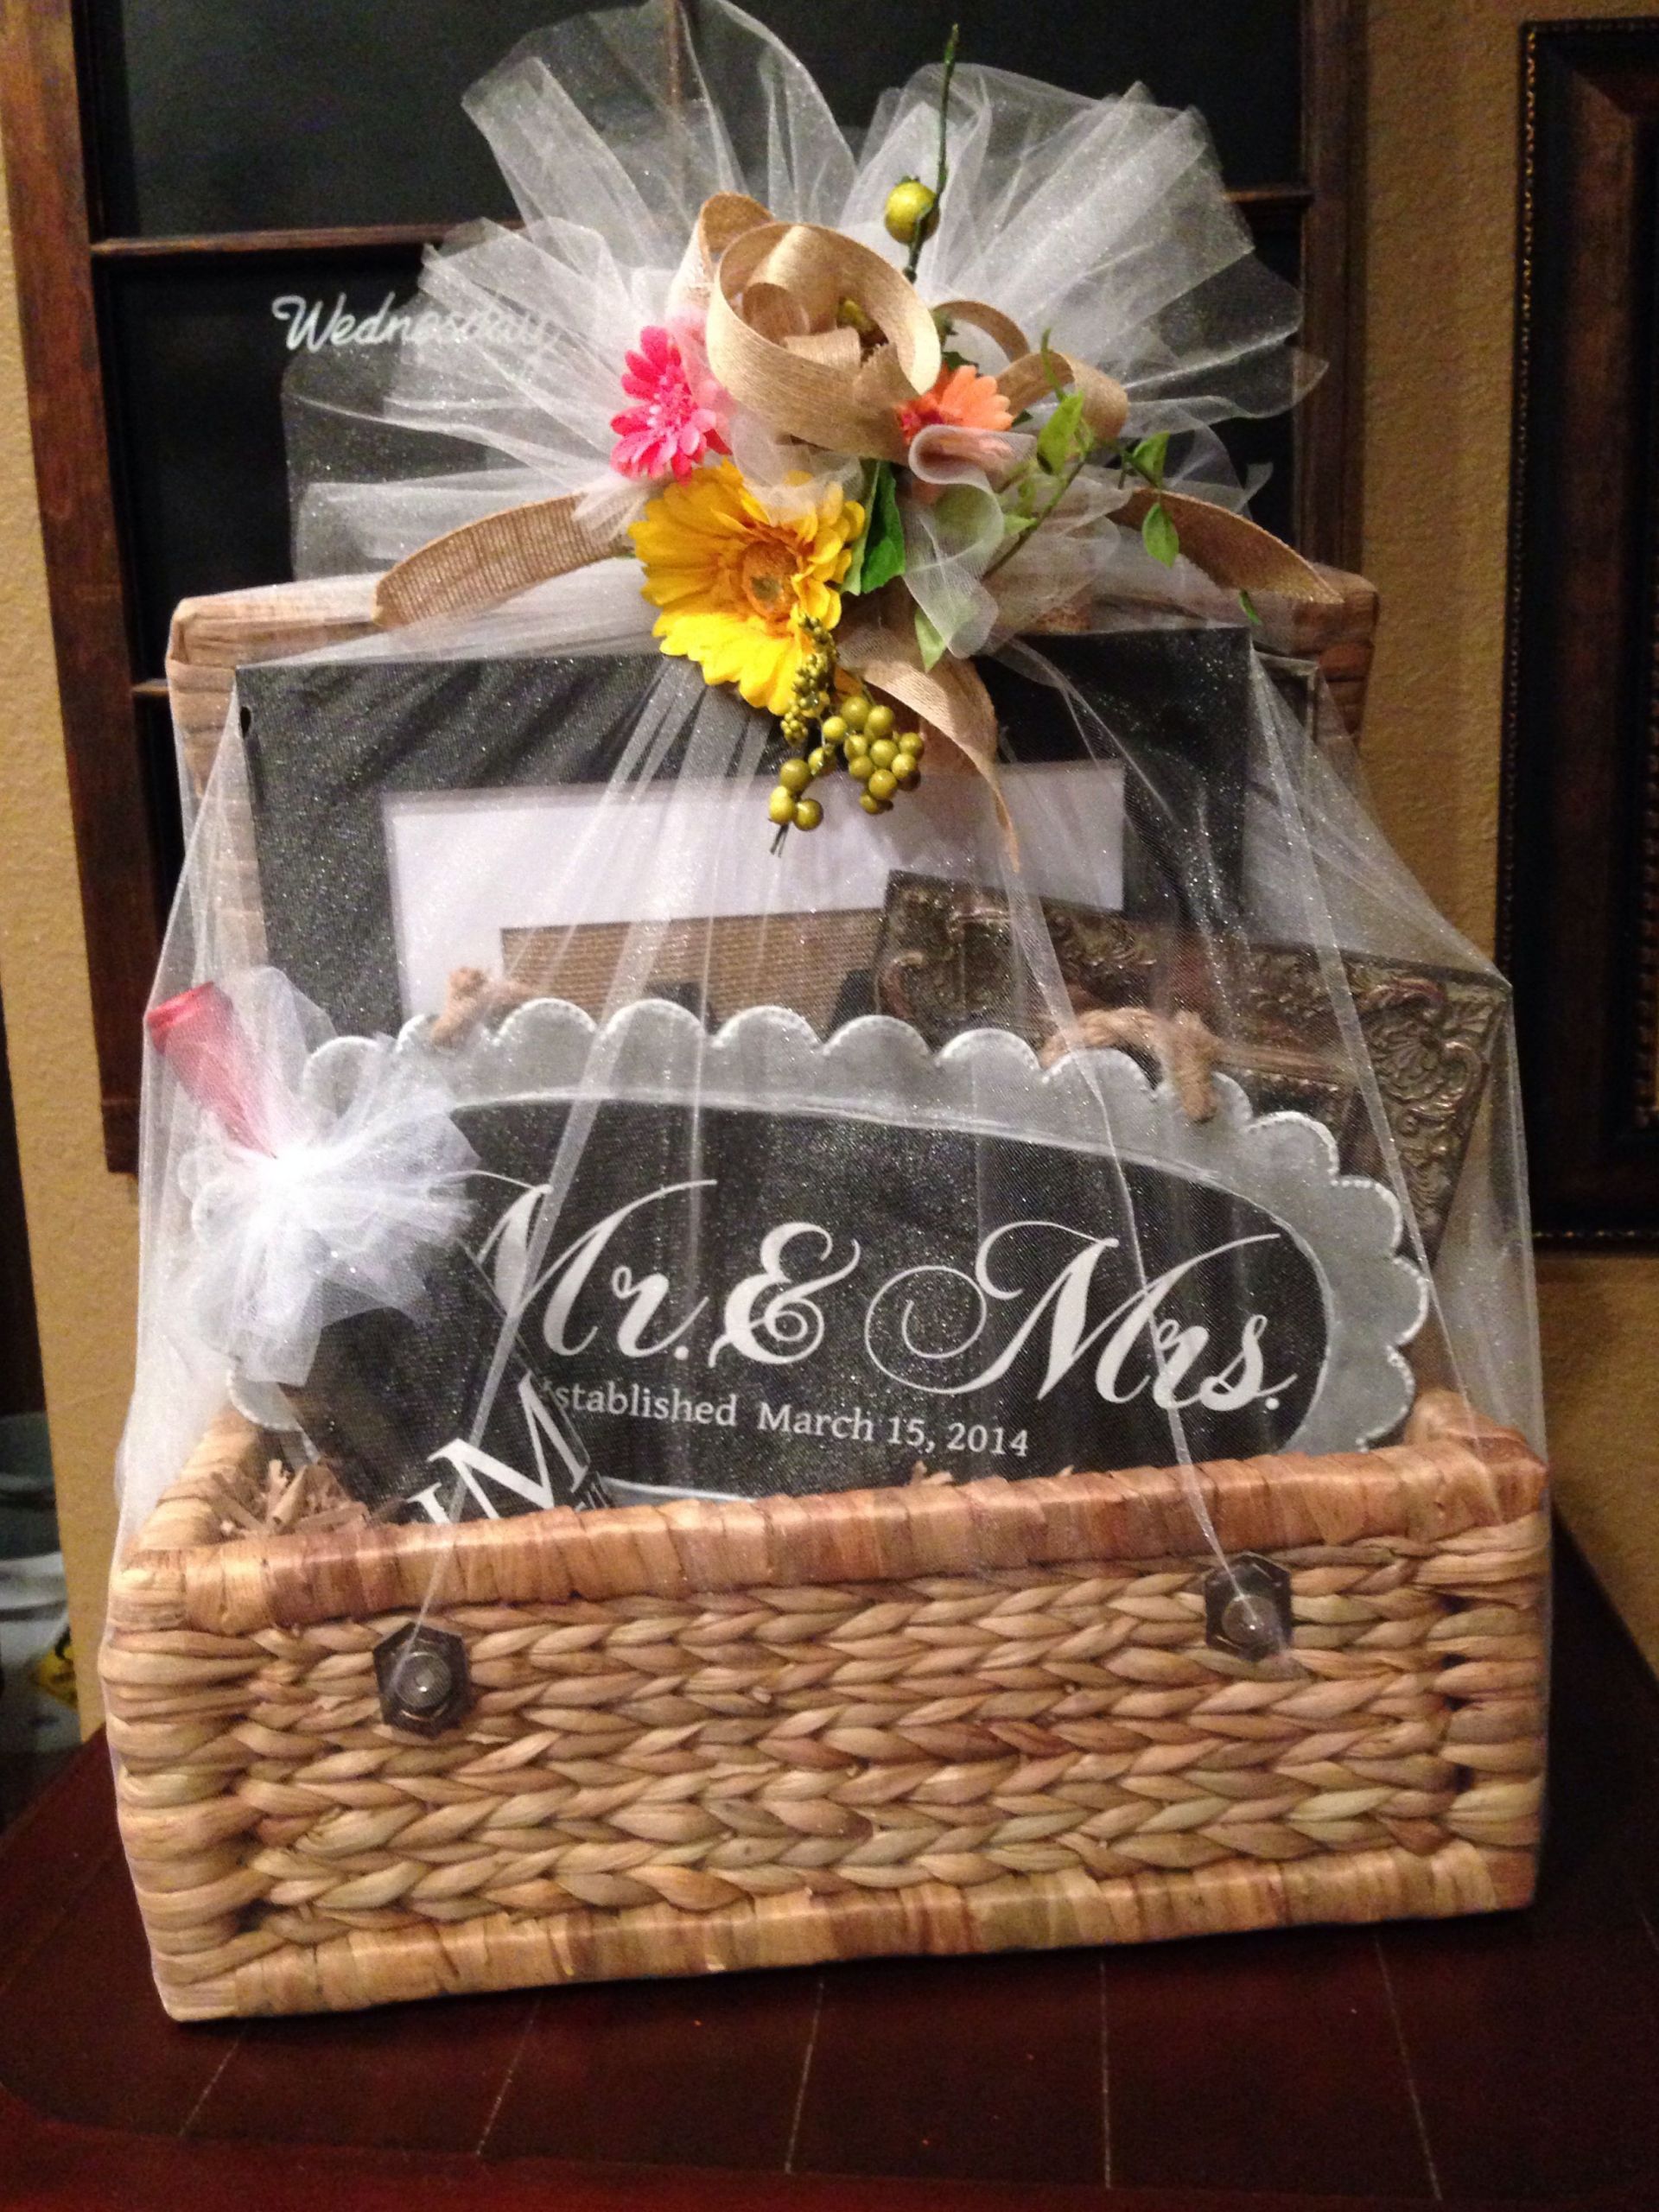 Homemade Wedding Gift Basket Ideas
 Wedding t basket filed with personalized ts made